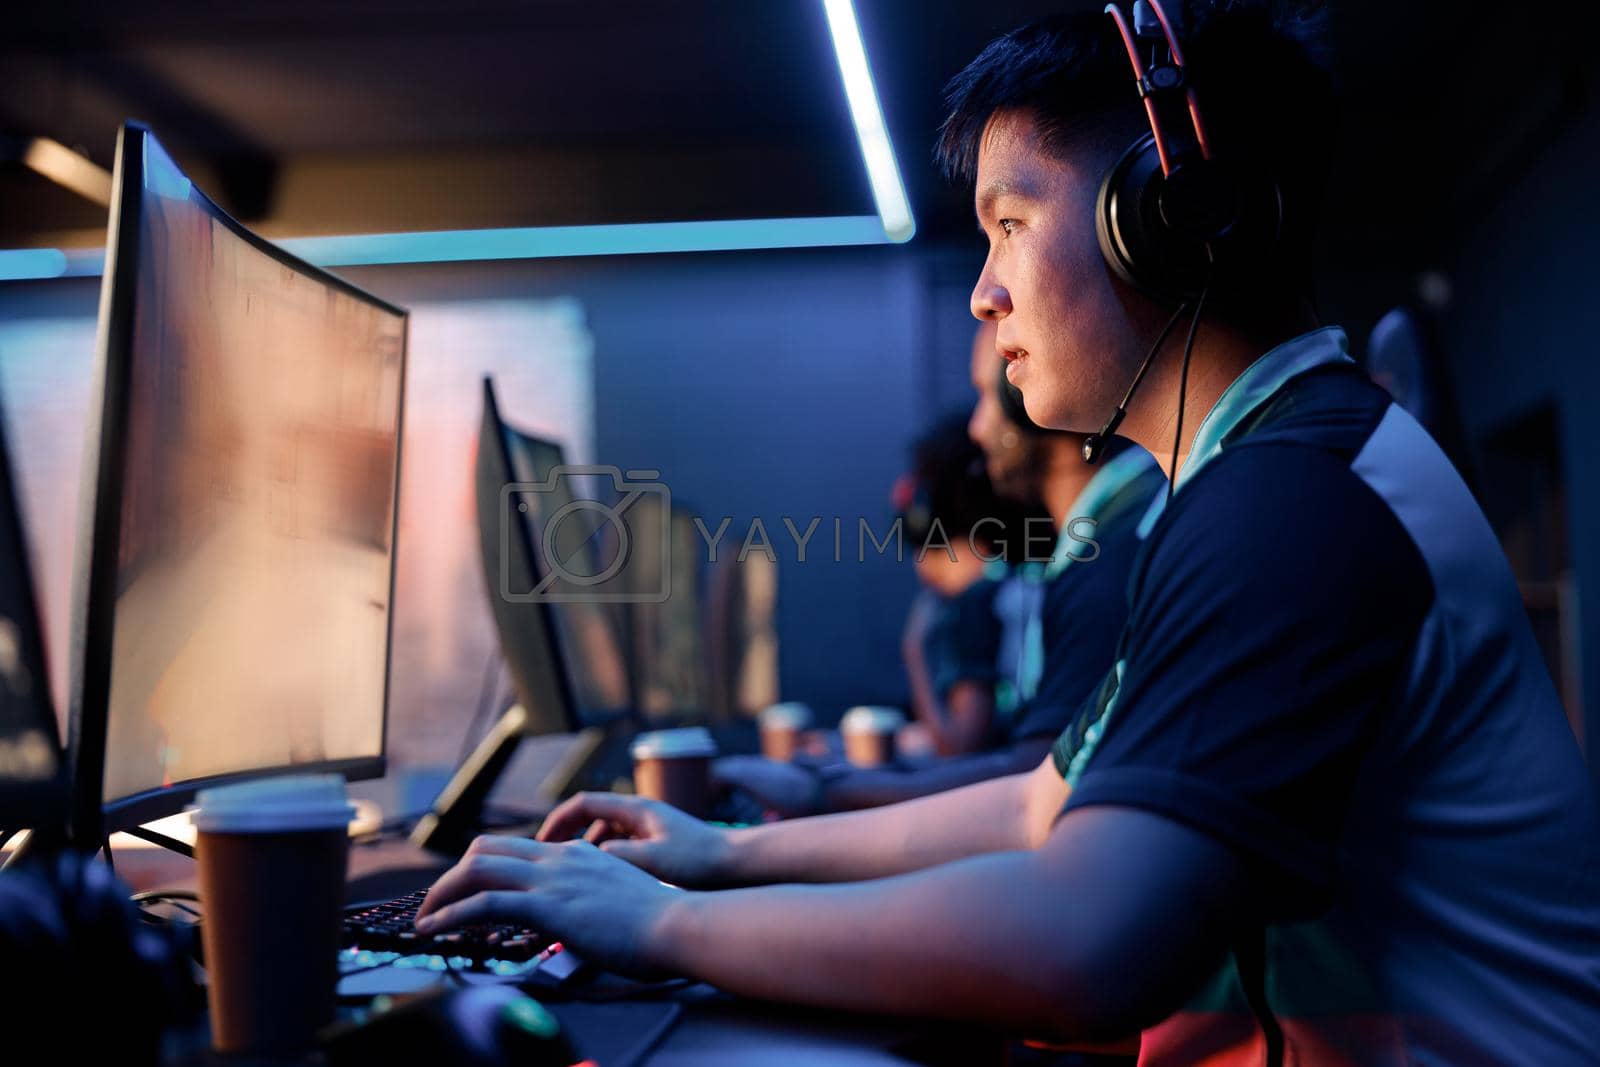 Royalty free image of Cybersport team participating in online tournament in computer club by Yaroslav_astakhov